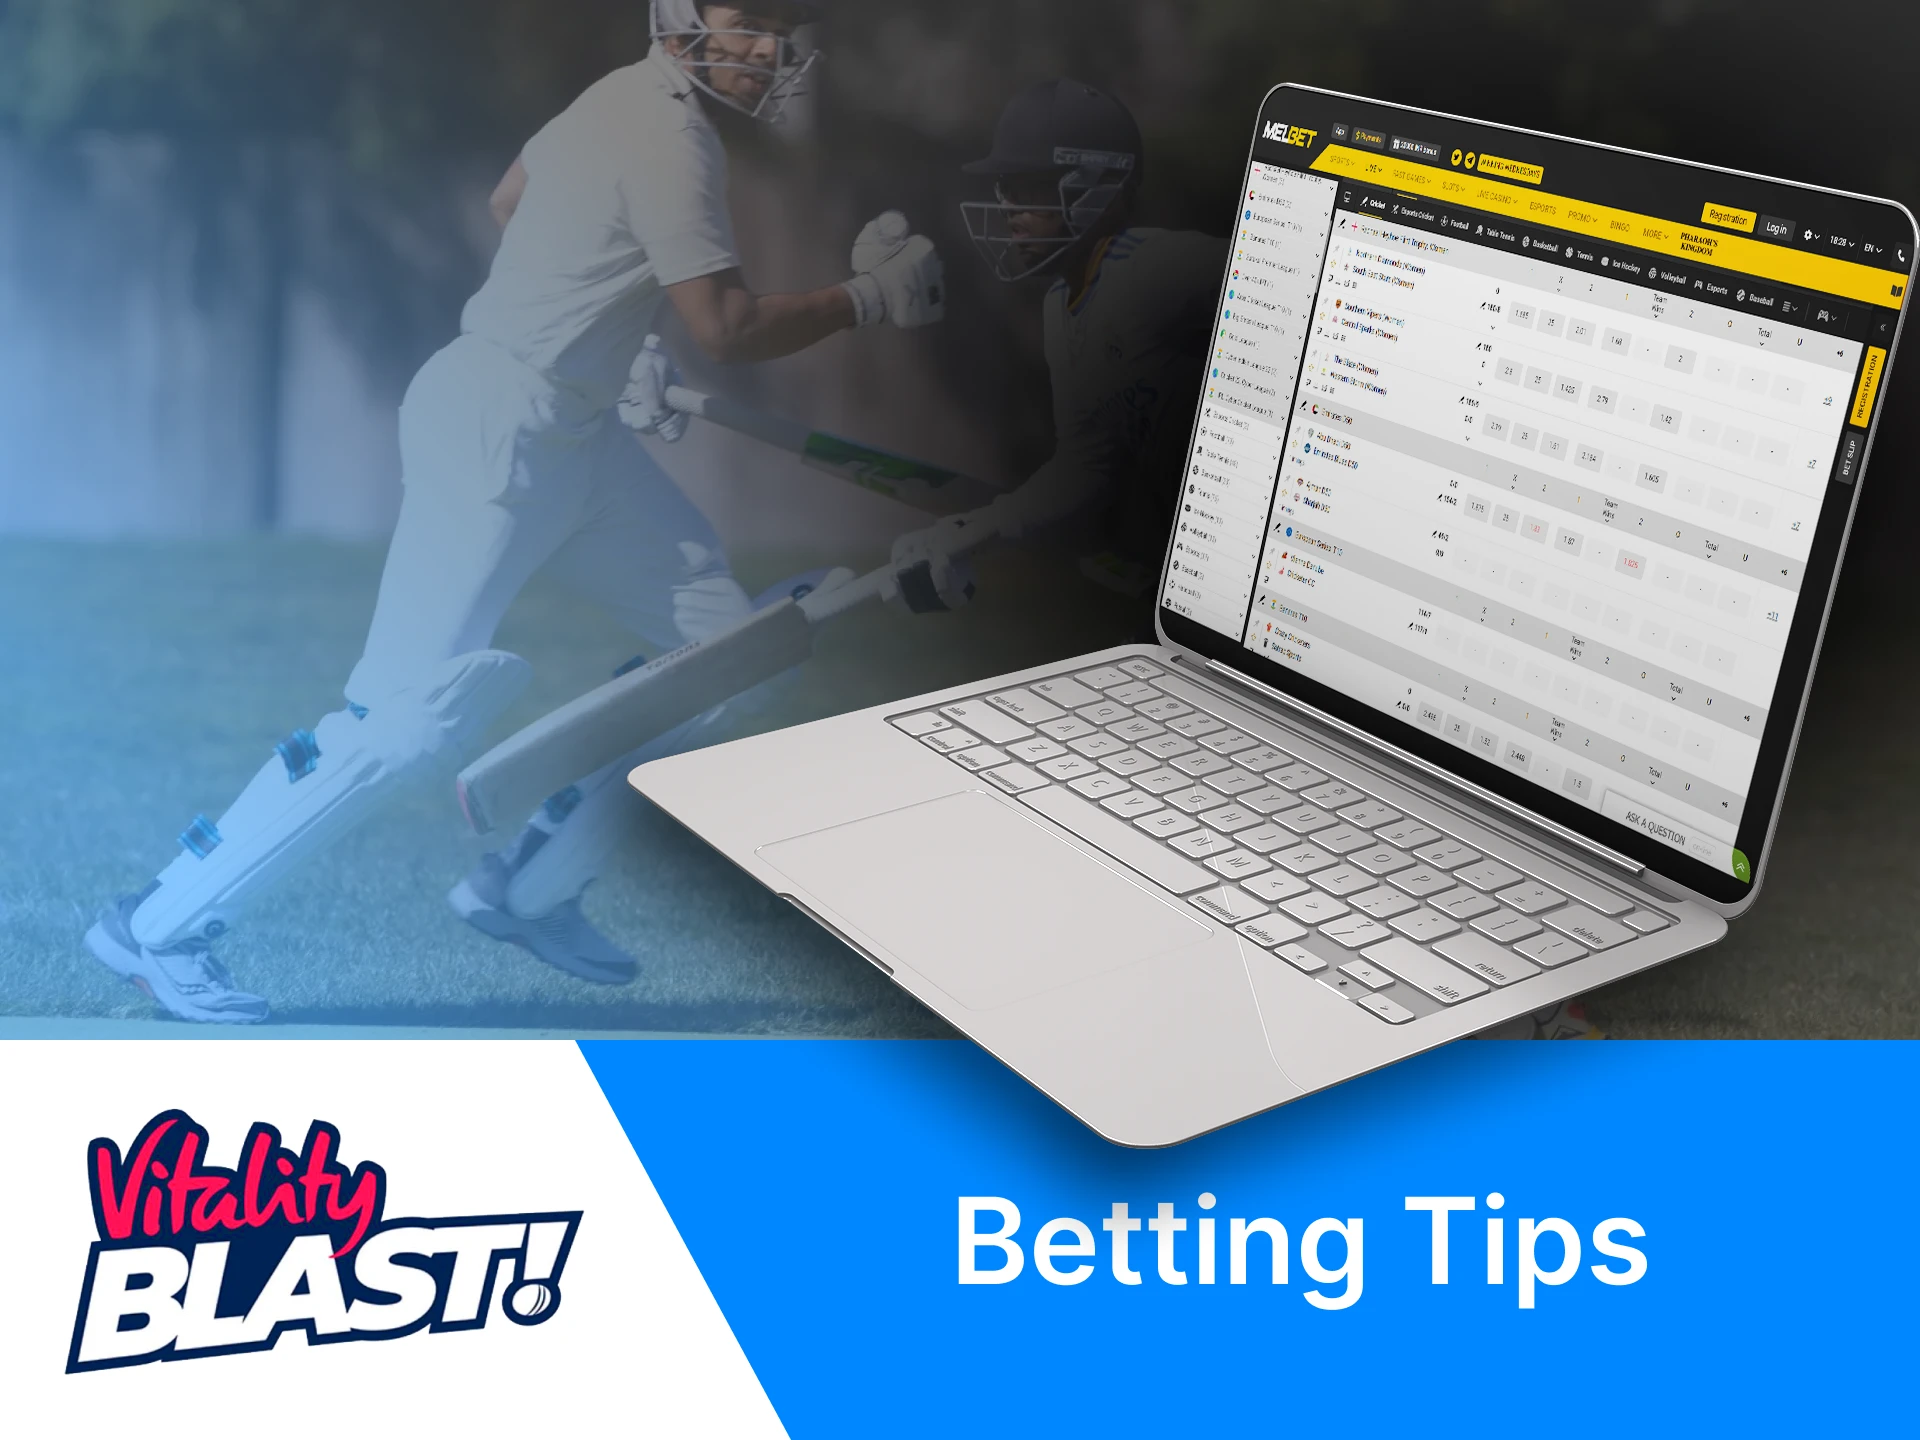 Follow our tips to get the highest profit from betting on the T20 Blast matches.